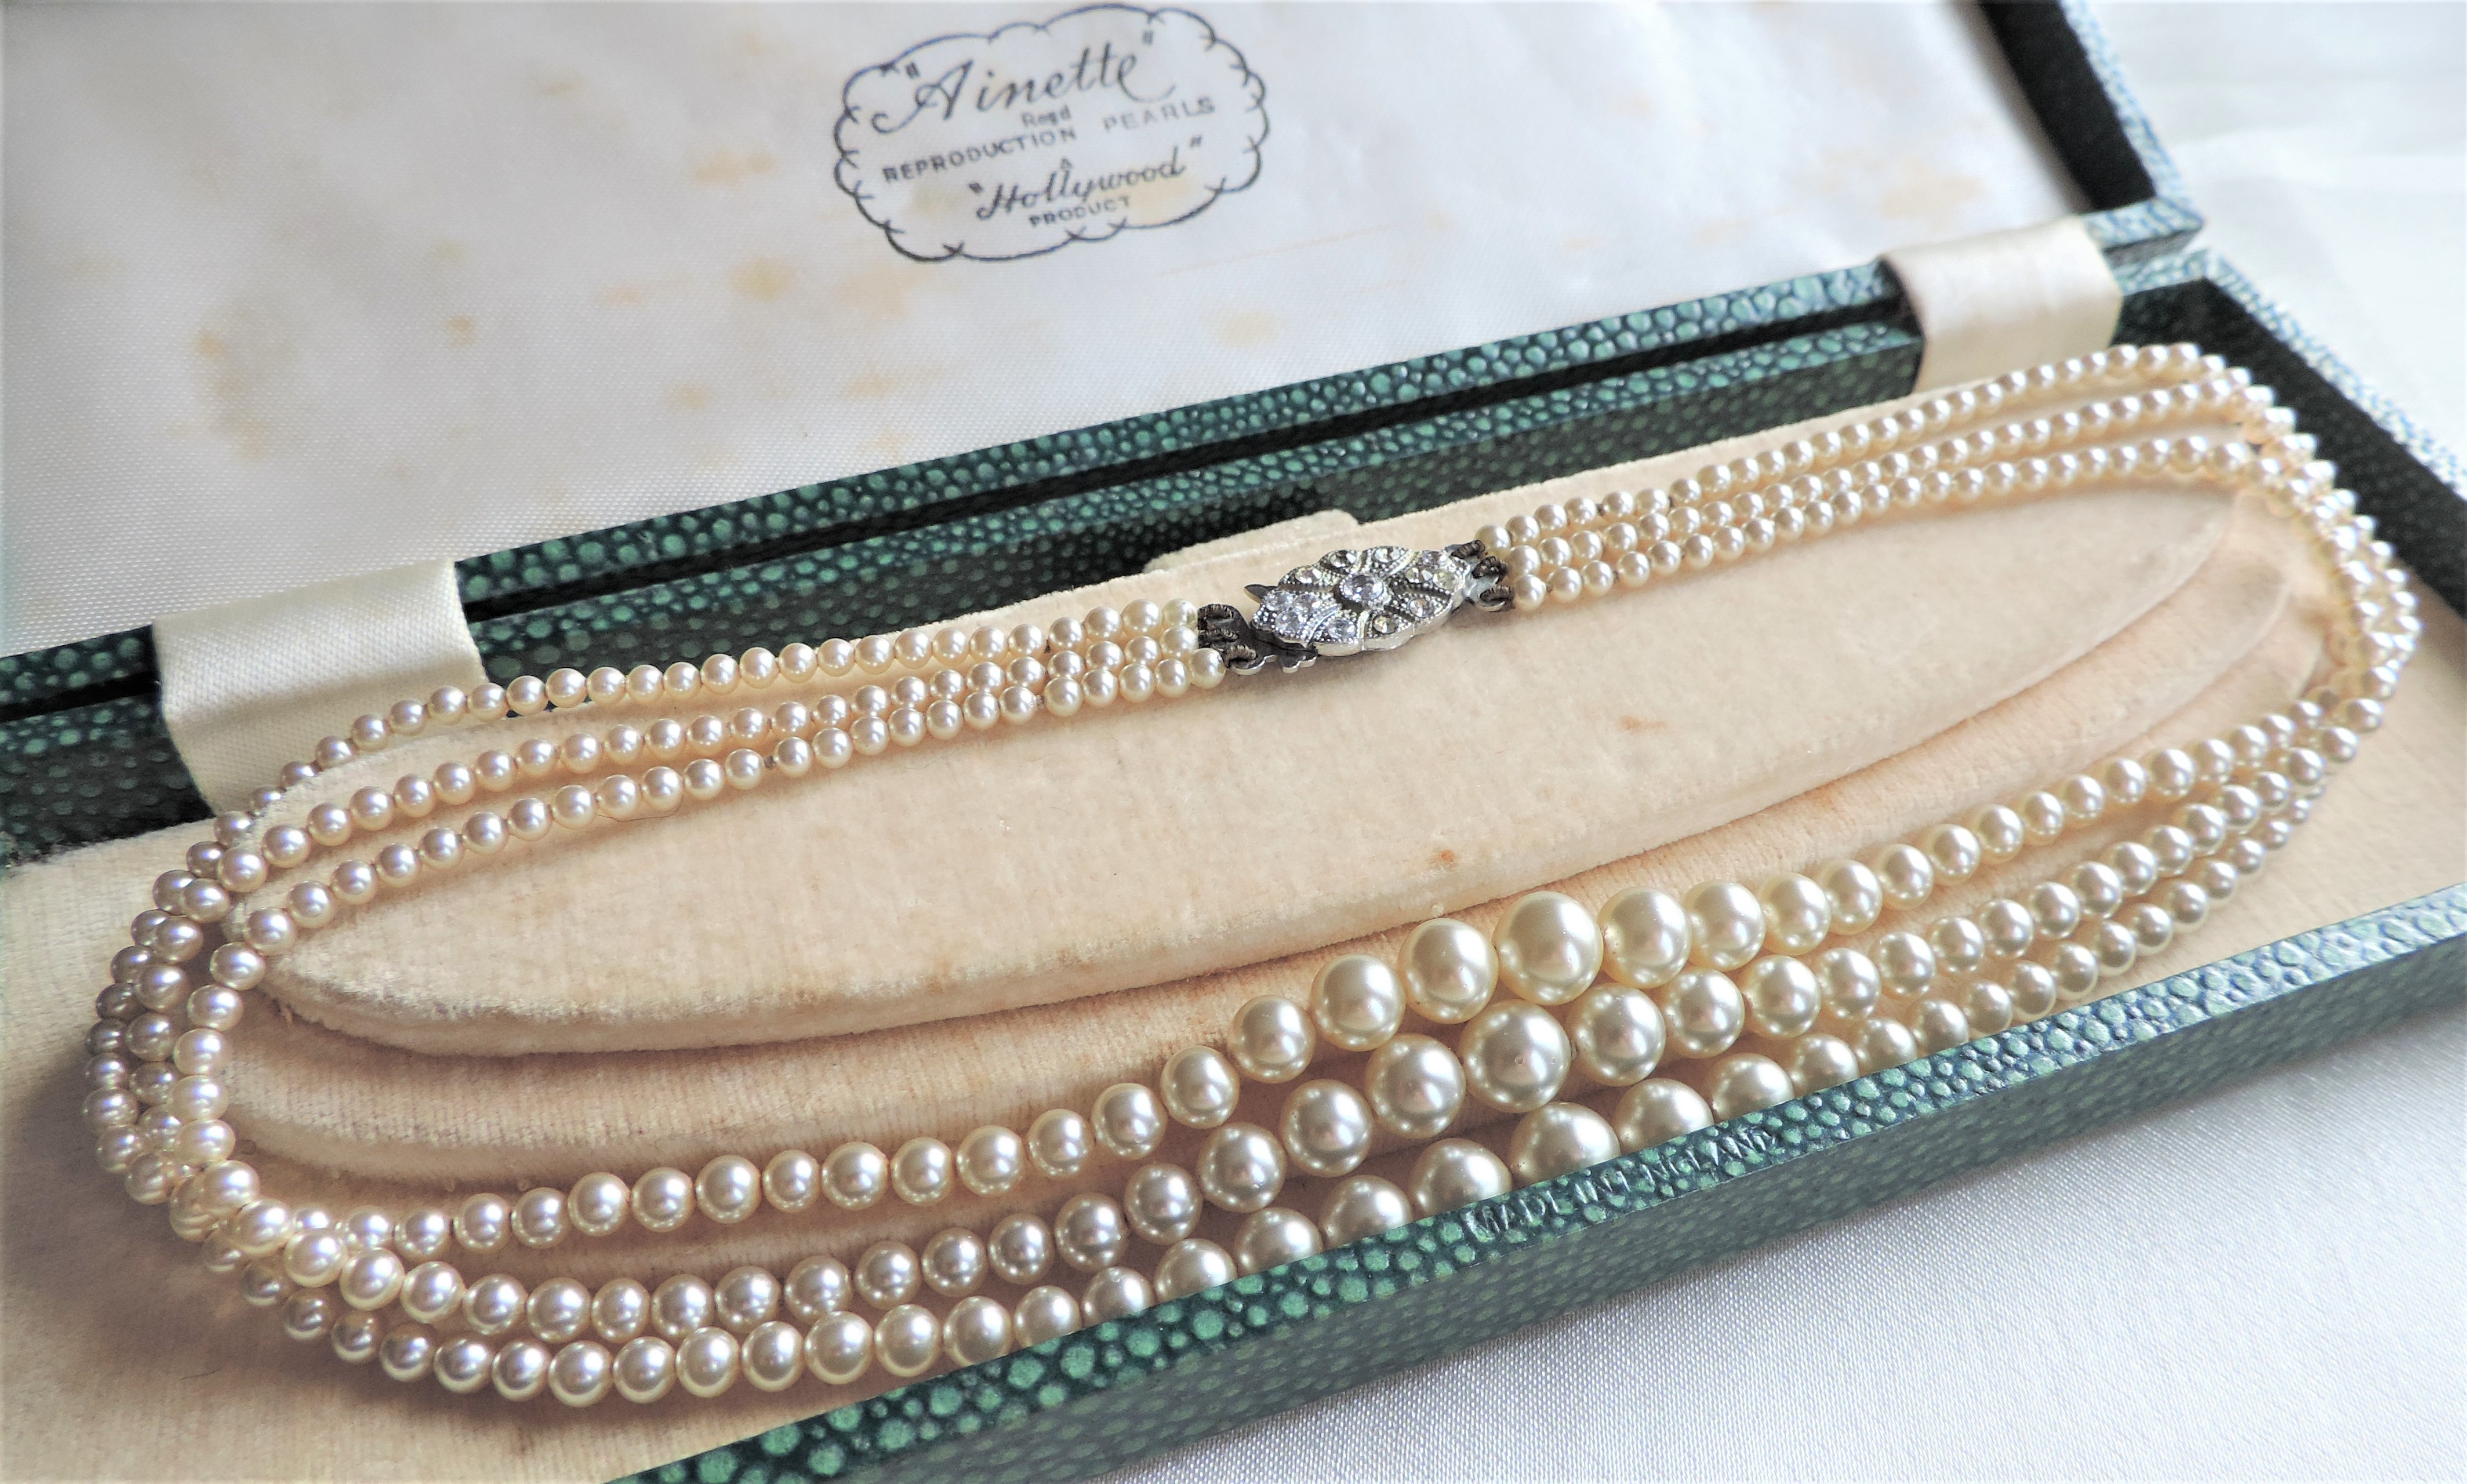 Vintage Triple Strand Graduated Pearl Necklace in Original Box - Image 2 of 4